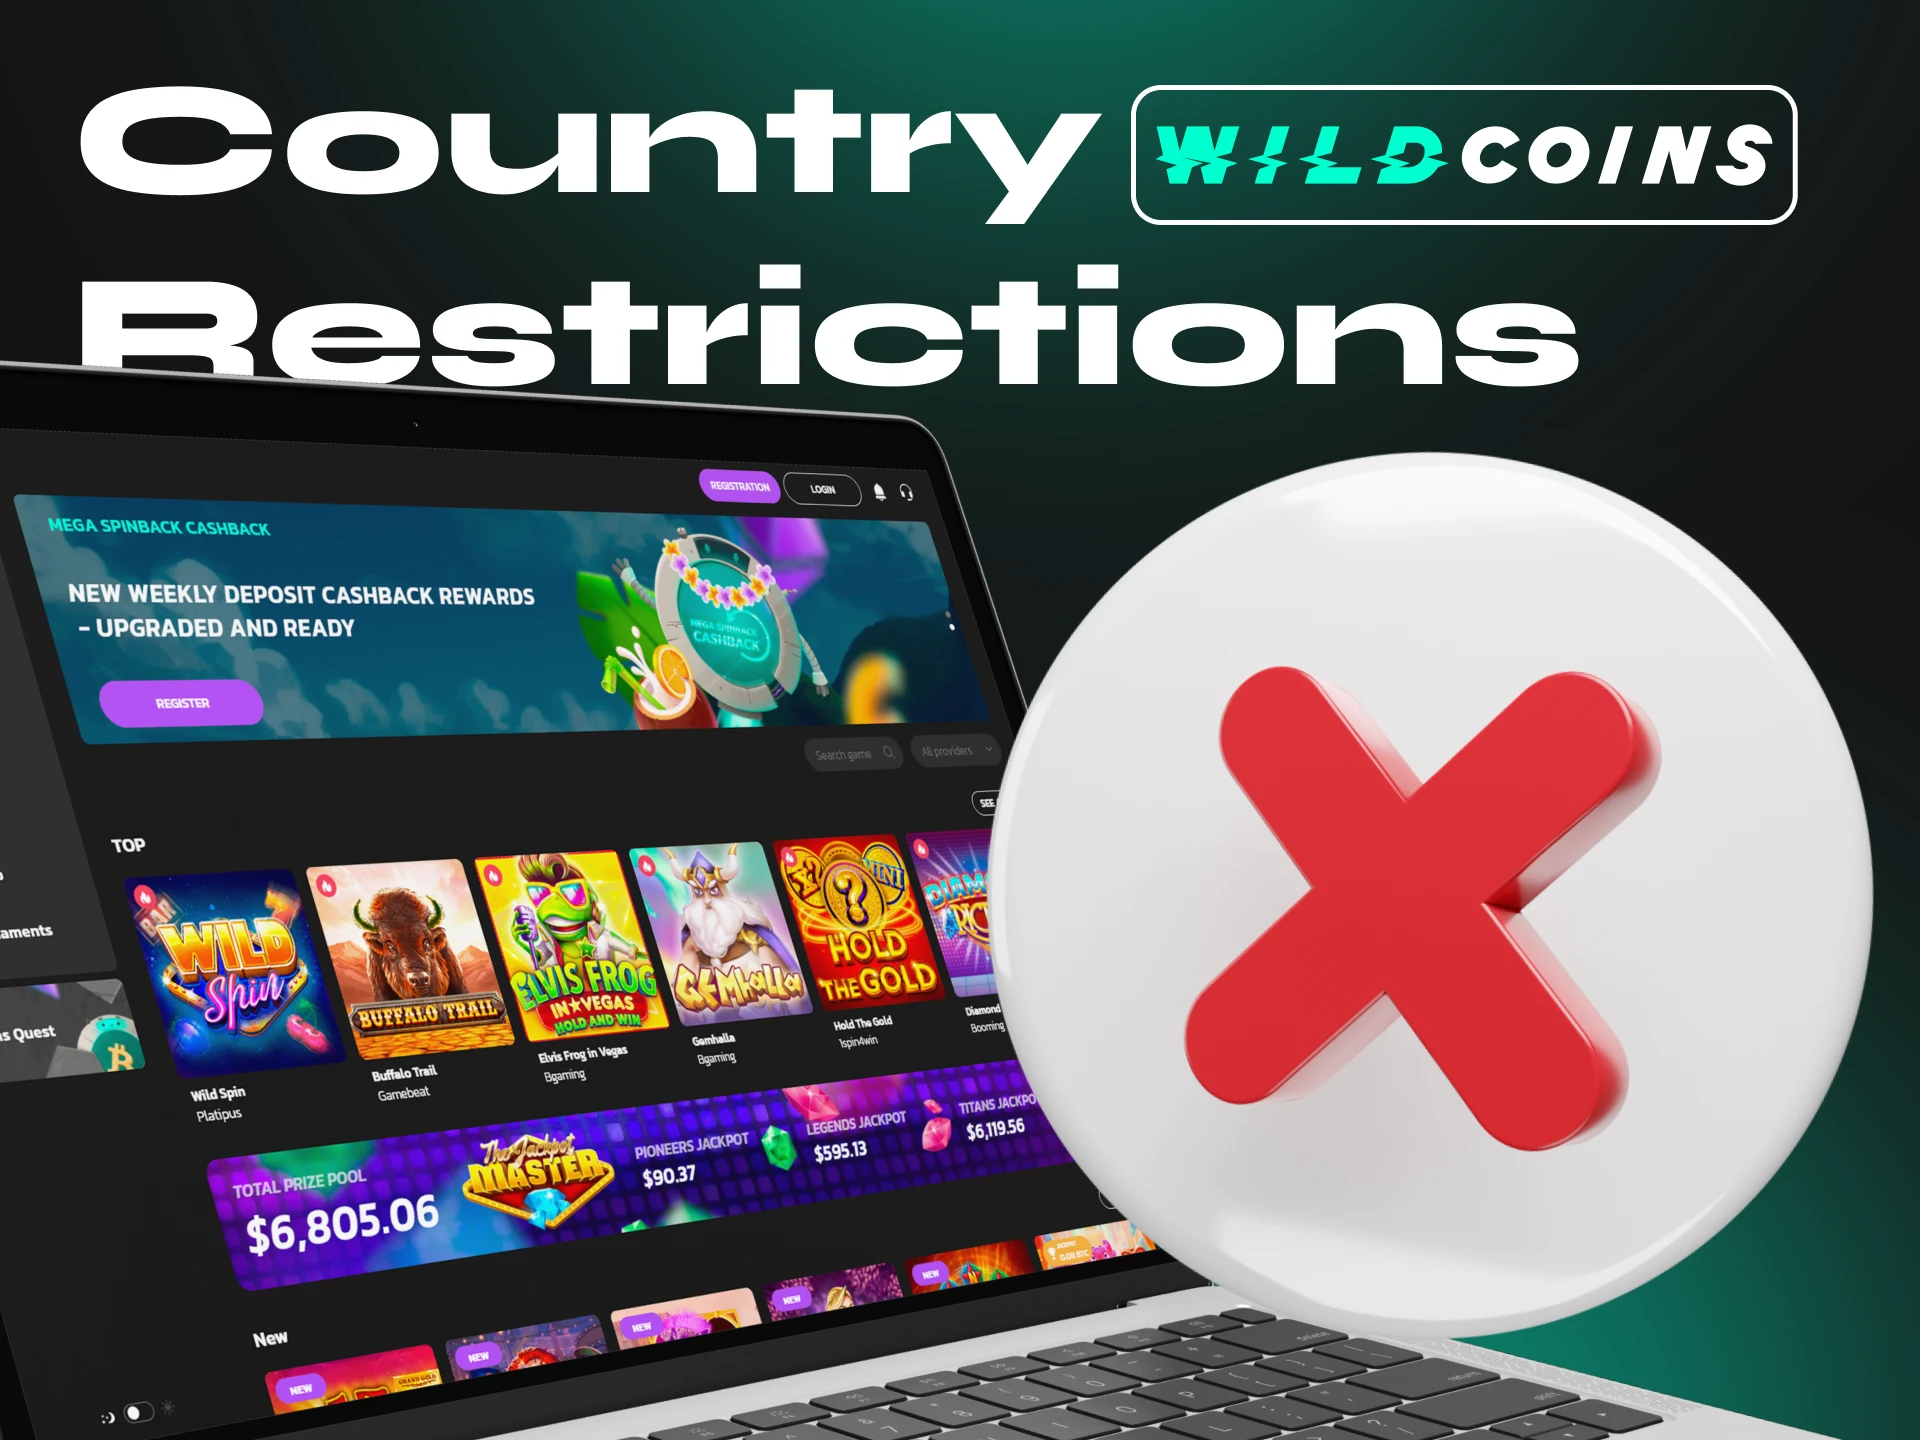 Unfortunately, Wildcoins Casino is not available in many countries.